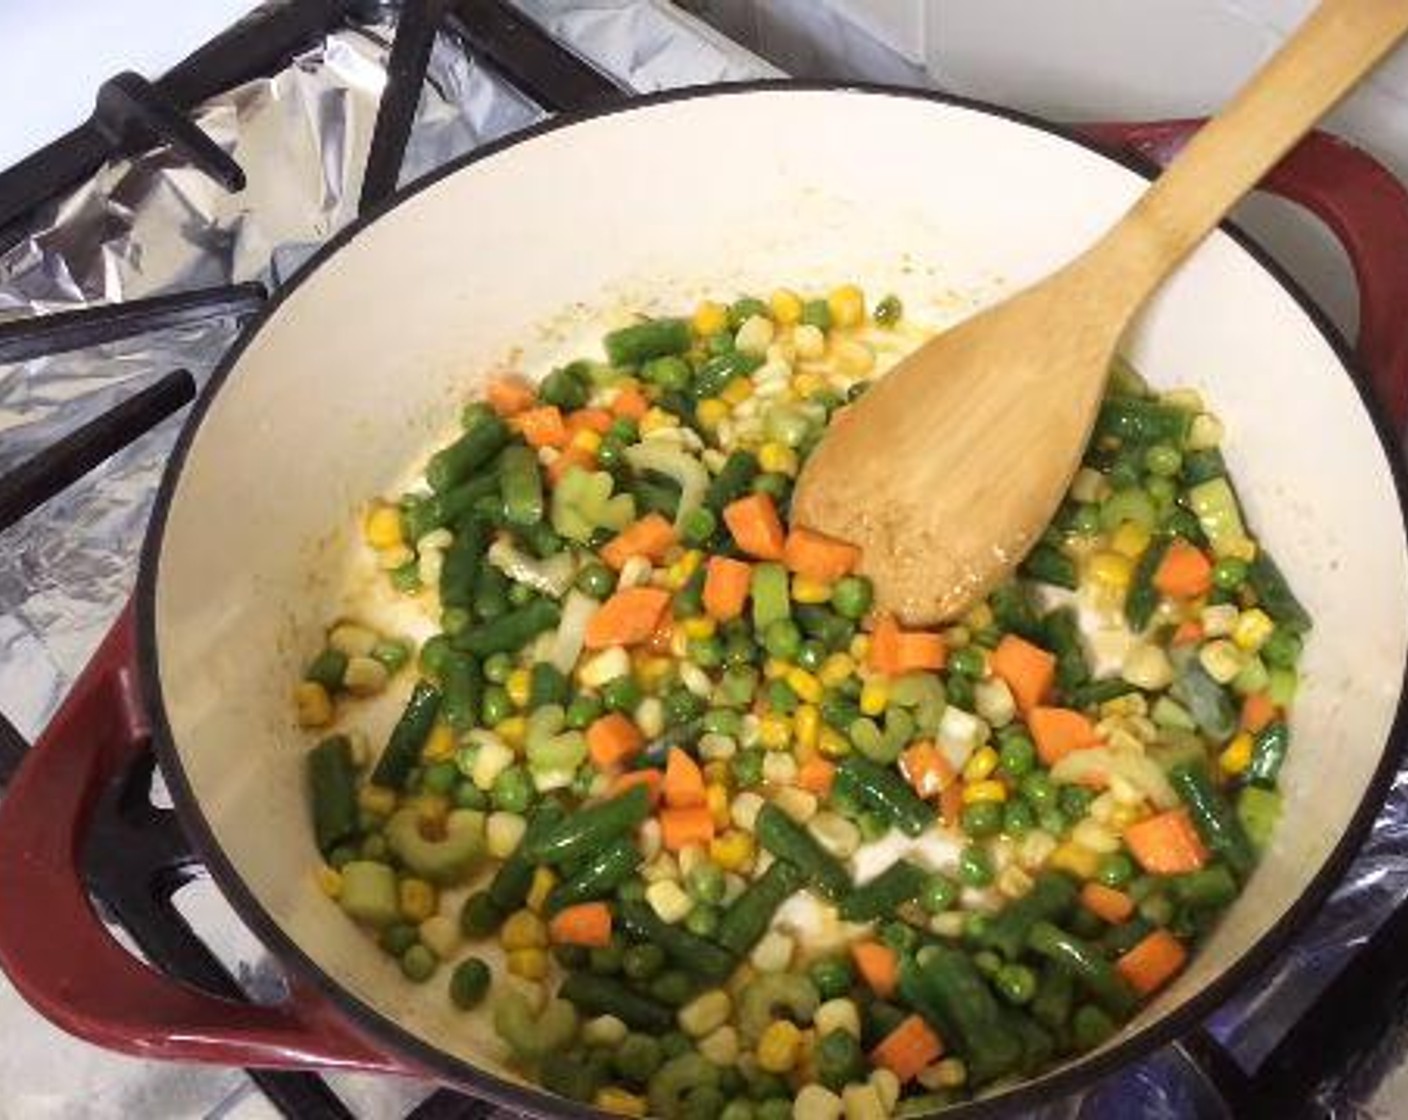 step 2 Stir in the Frozen Green Beans (1/2 cup), Frozen Corn Kernels (3/4 cup), Celery (1 stalk), Carrot (1), and Frozen Green Peas (1/2 cup) and cook them for about 2 minutes.